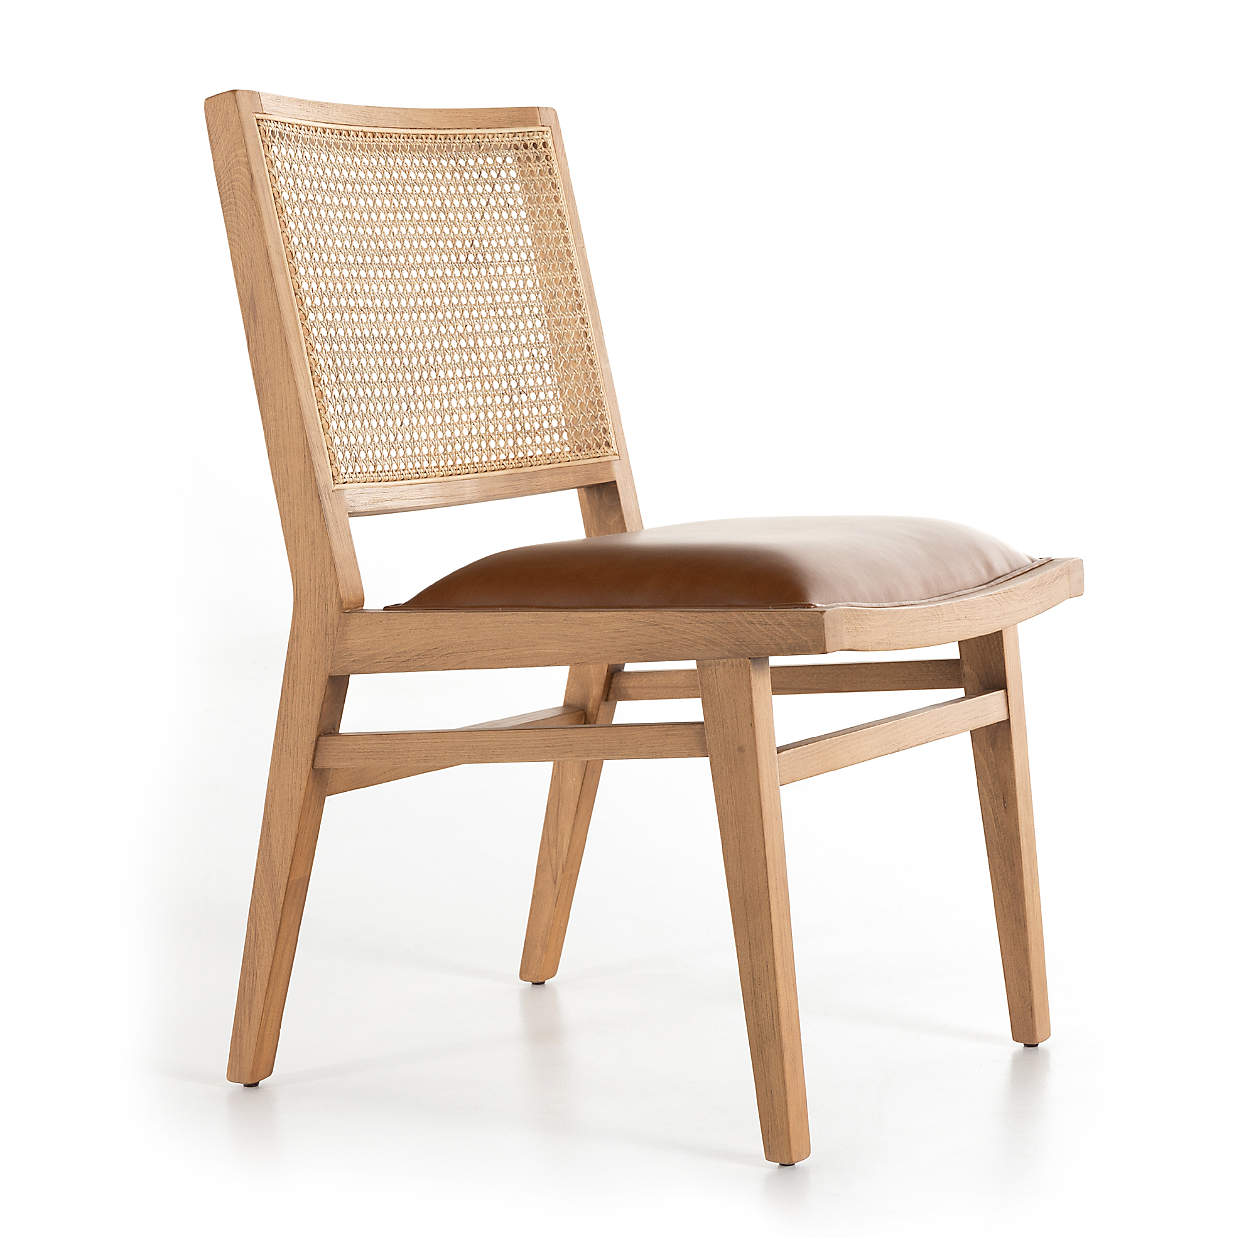 Dalton Leather and Cane Dining Chair